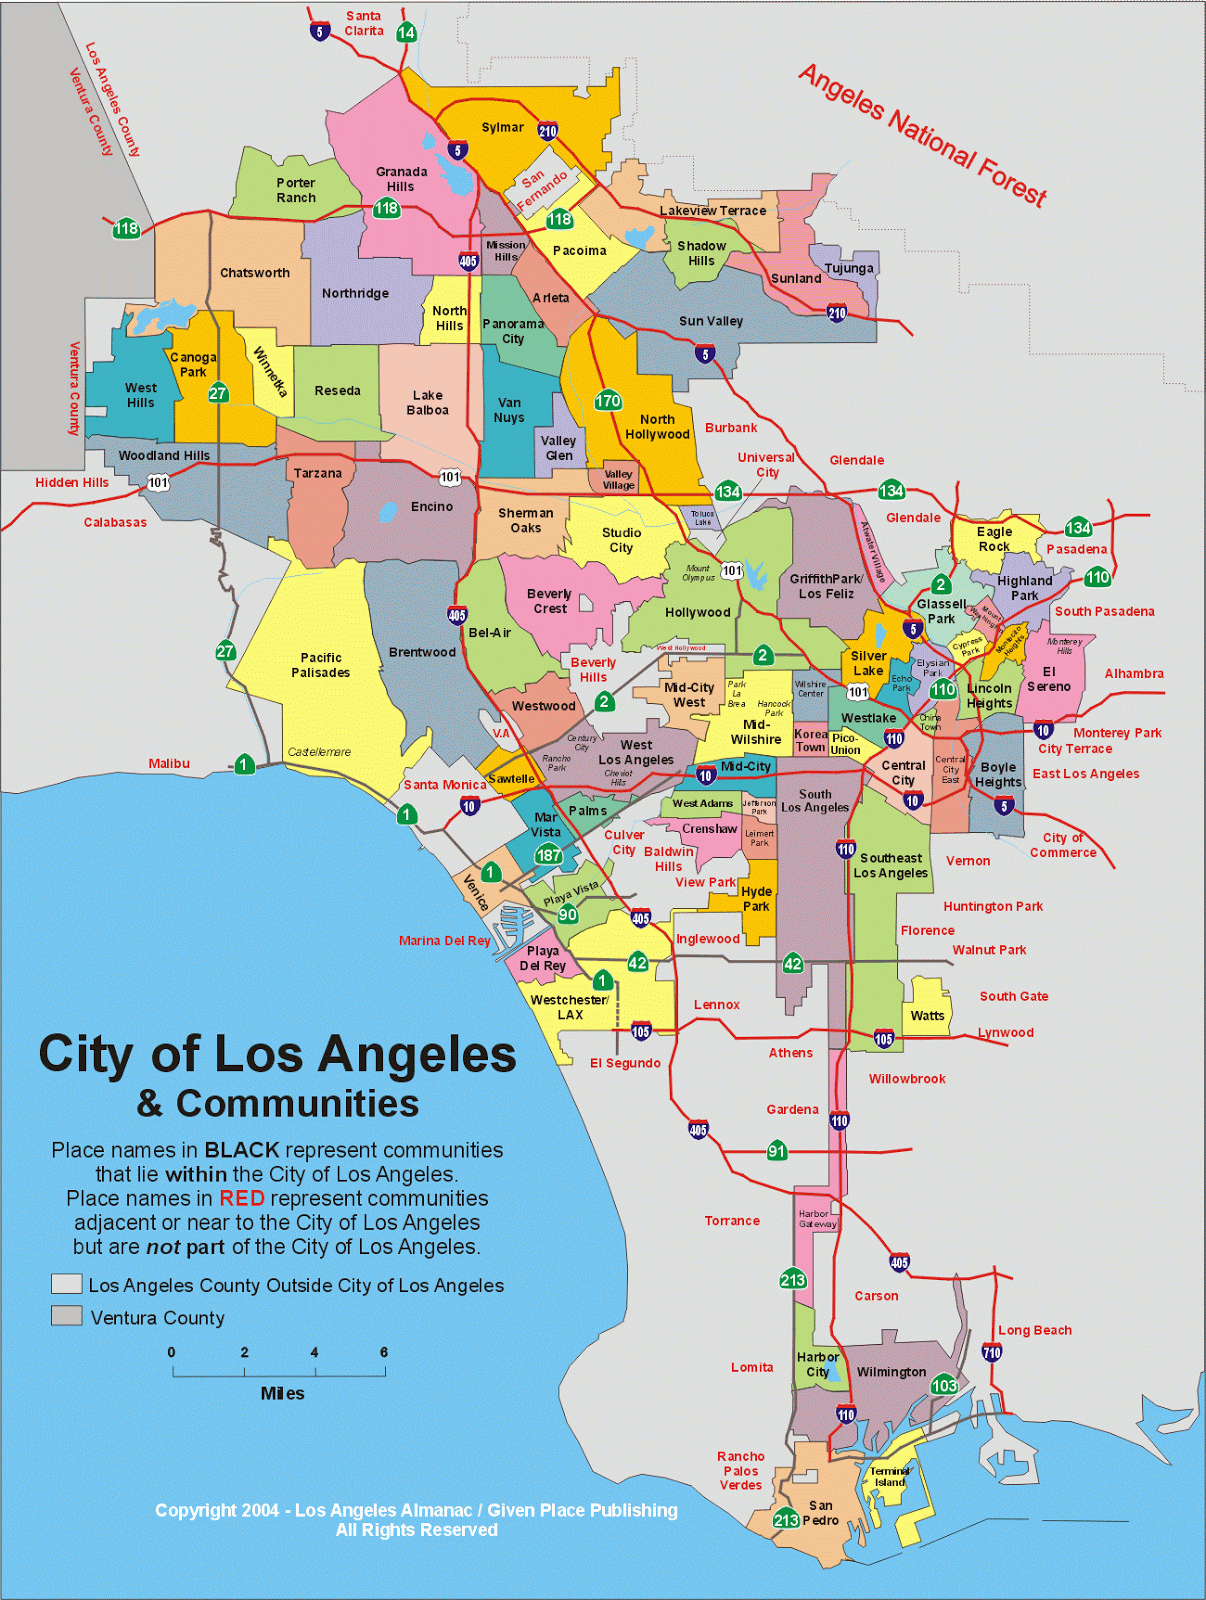 Experiencing Los Angeles: The City of Los Angeles: Who's In, Who's Not